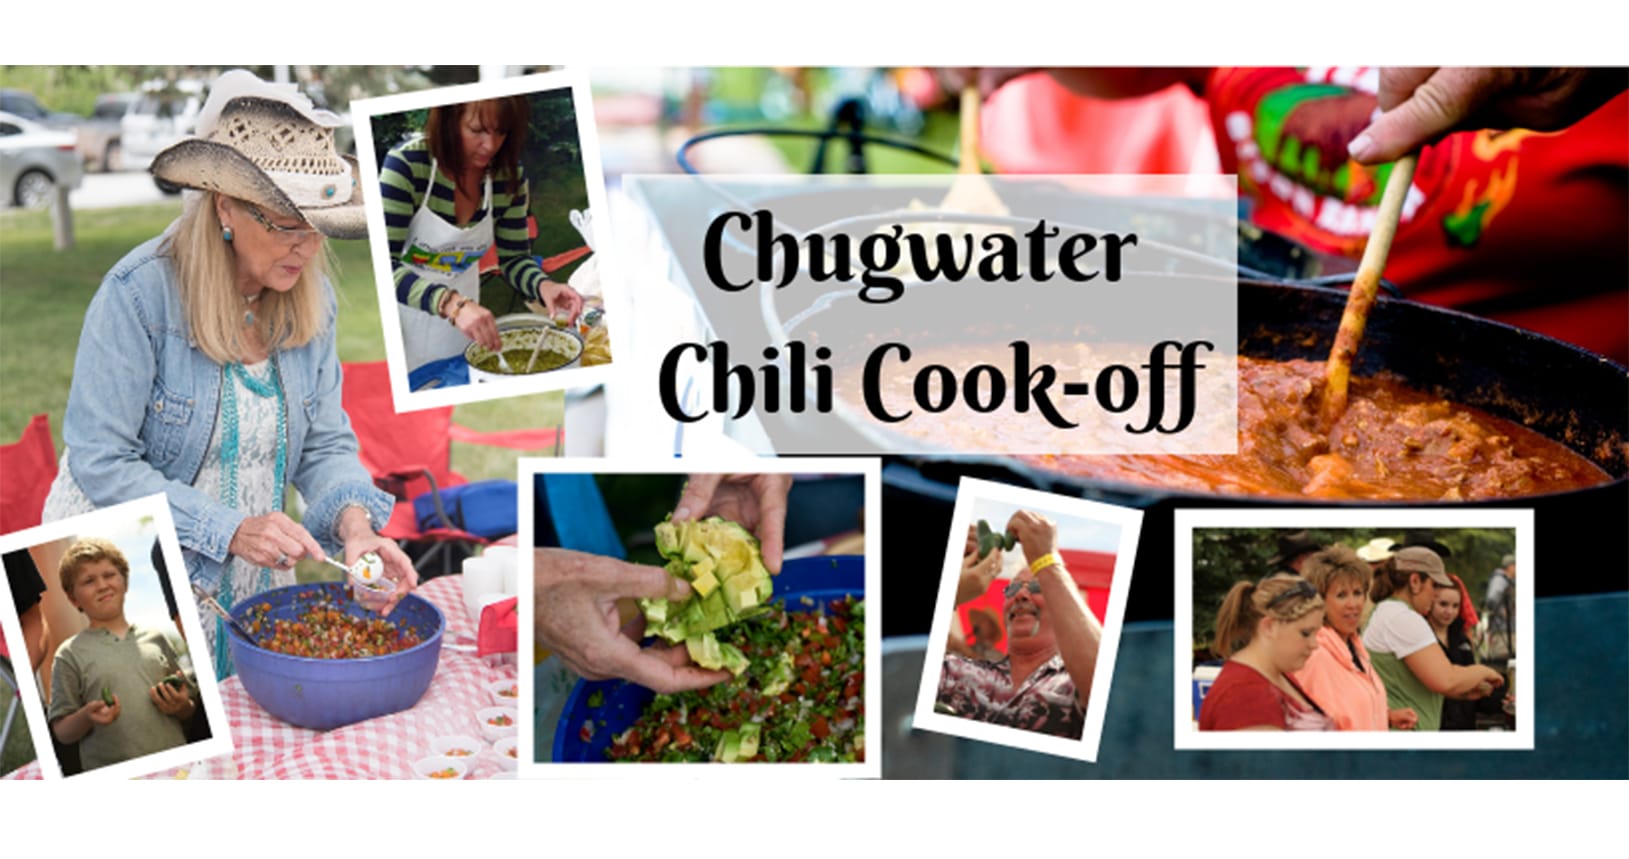 Don't Miss The 38th Annual Famous Chugwater Chili Cook-off!